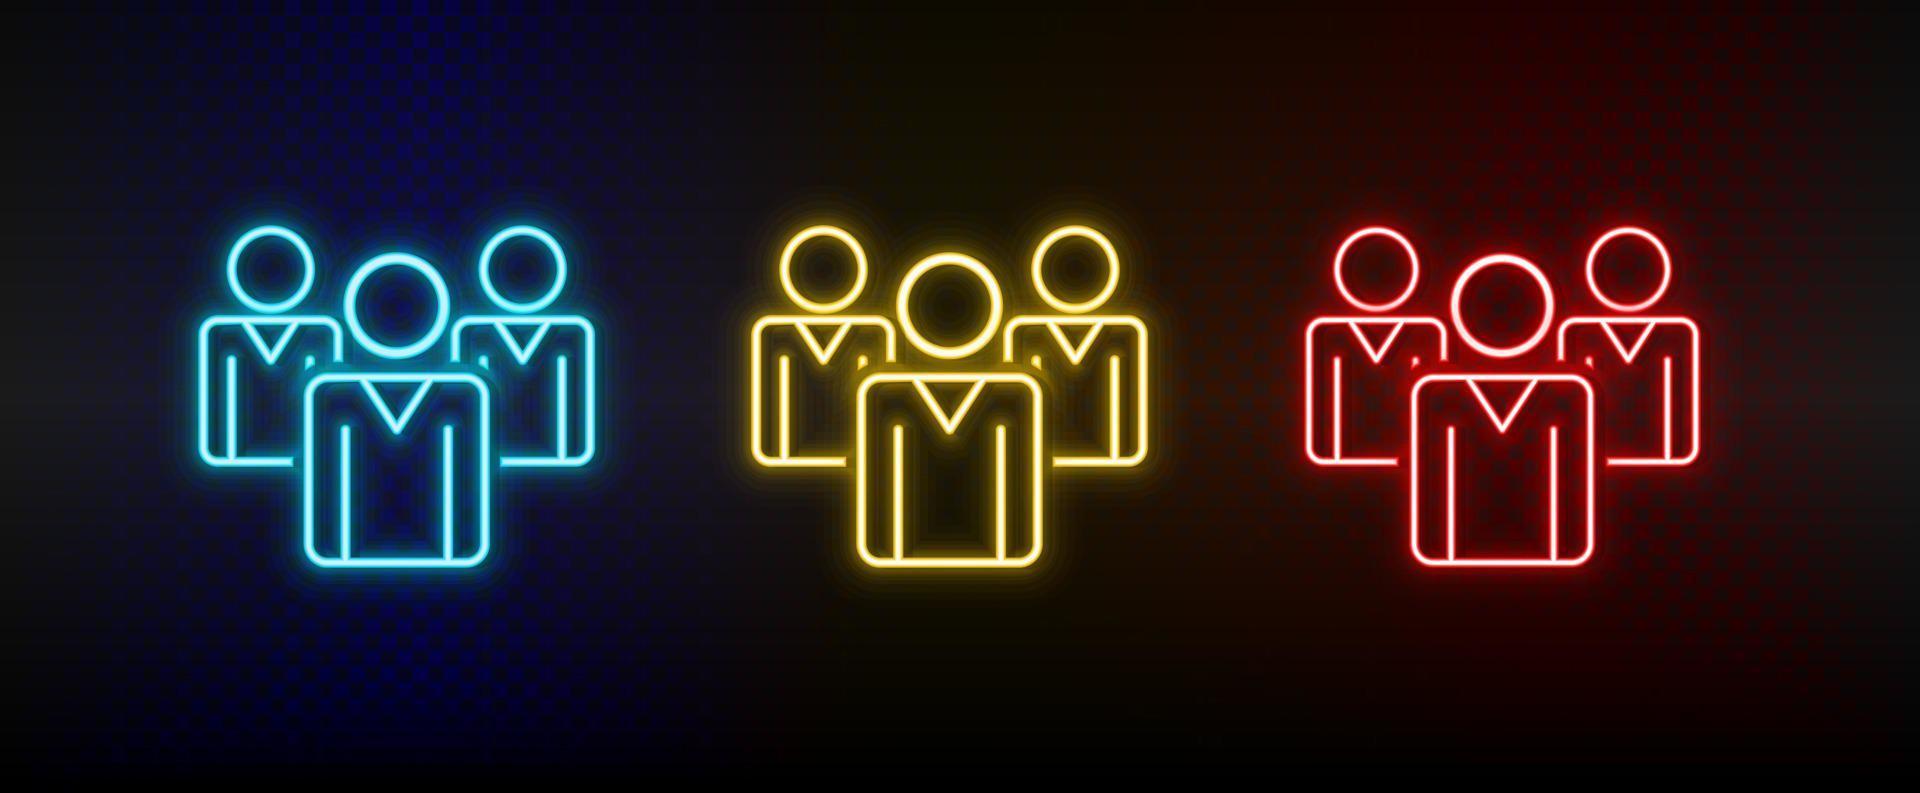 Neon icon set businesswoman, leader. Set of red, blue, yellow neon vector icon on transparency dark background